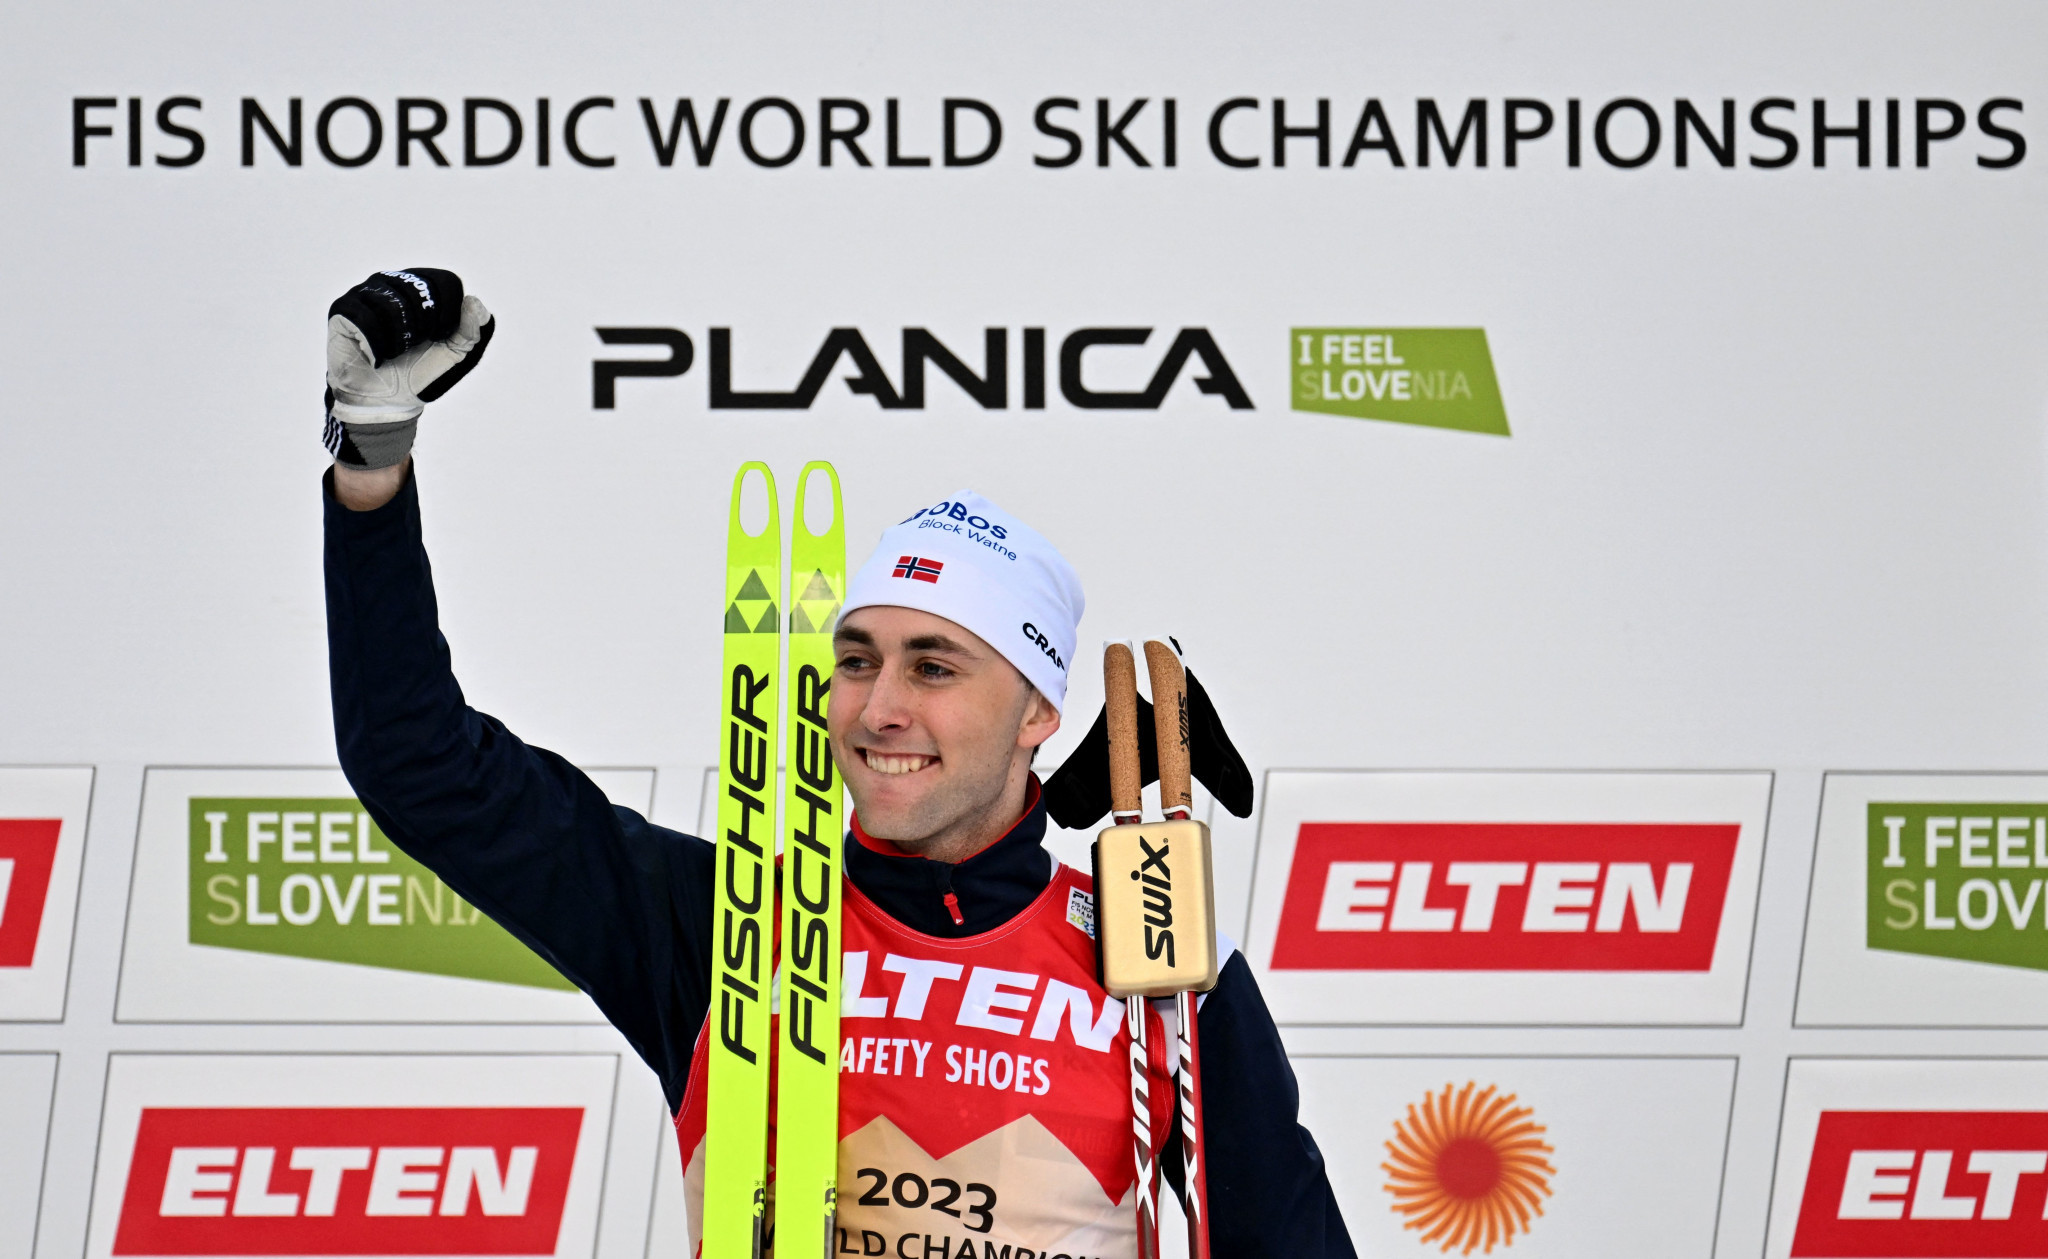 Riiber completes hat-trick as Żyła defends title at FIS Nordic Ski World Championships